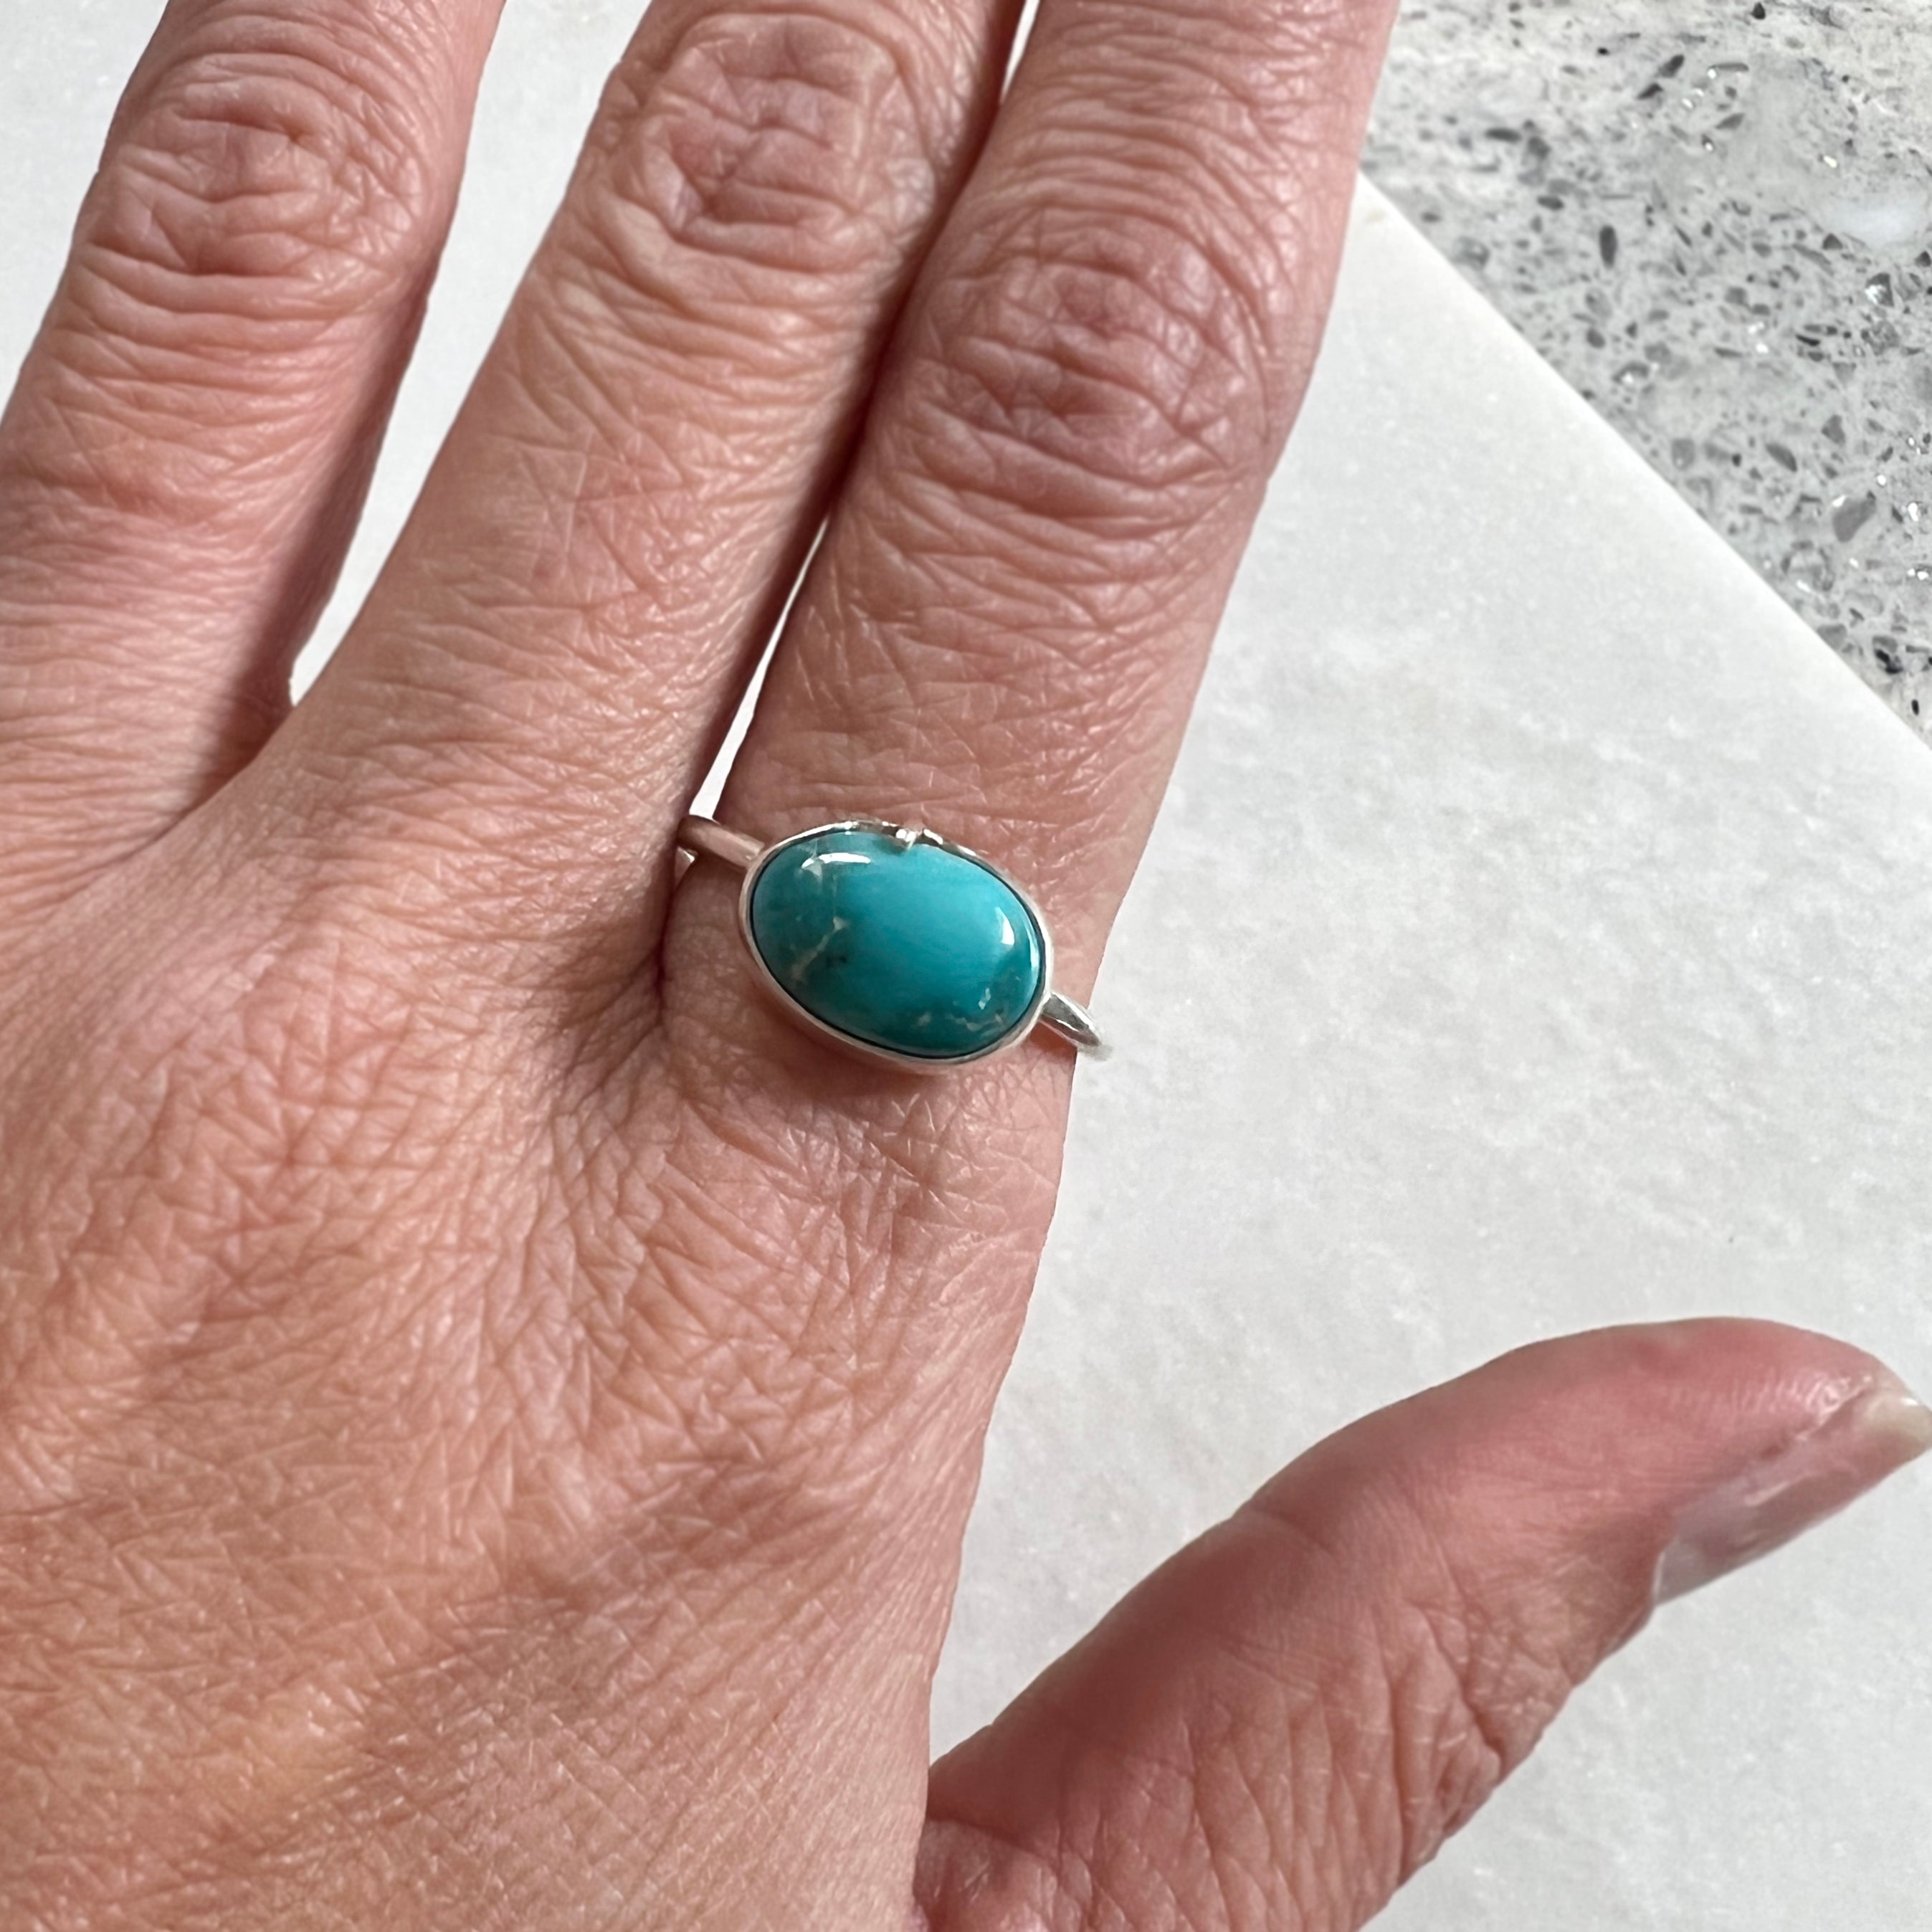 Turquoise Ring // size 8.5